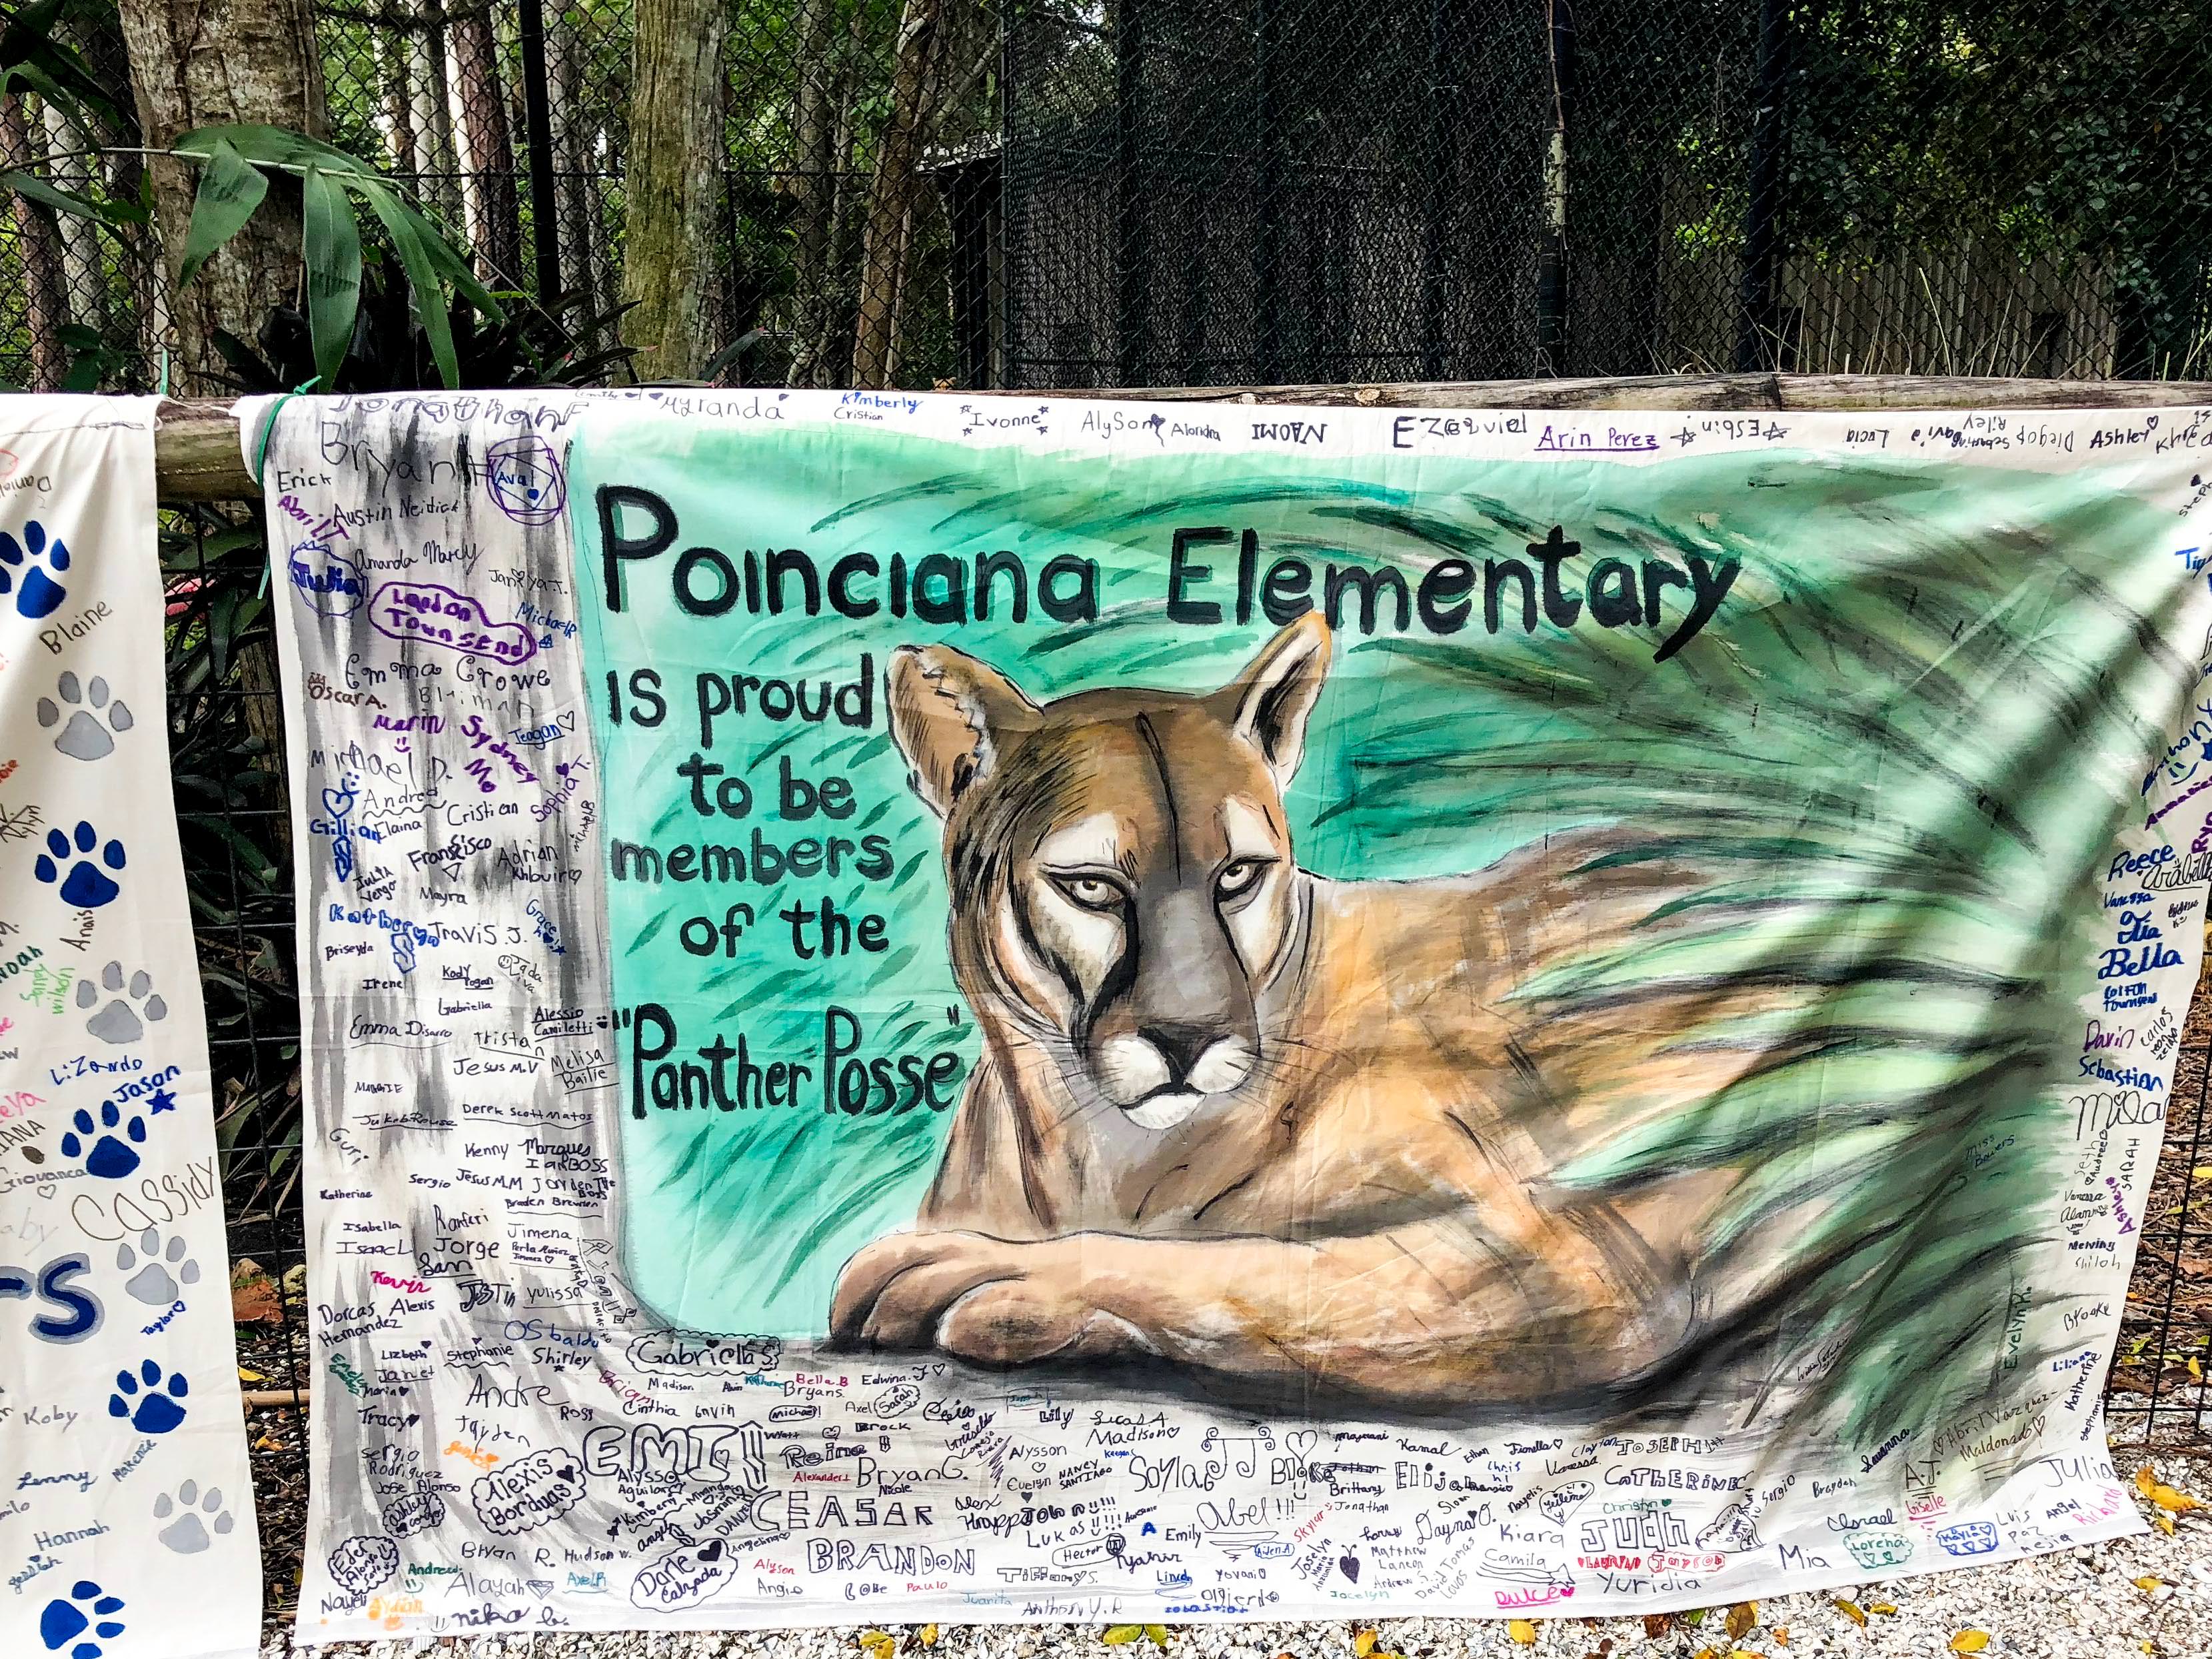 banner with image of a florida panther painted on it signed by elementary school students